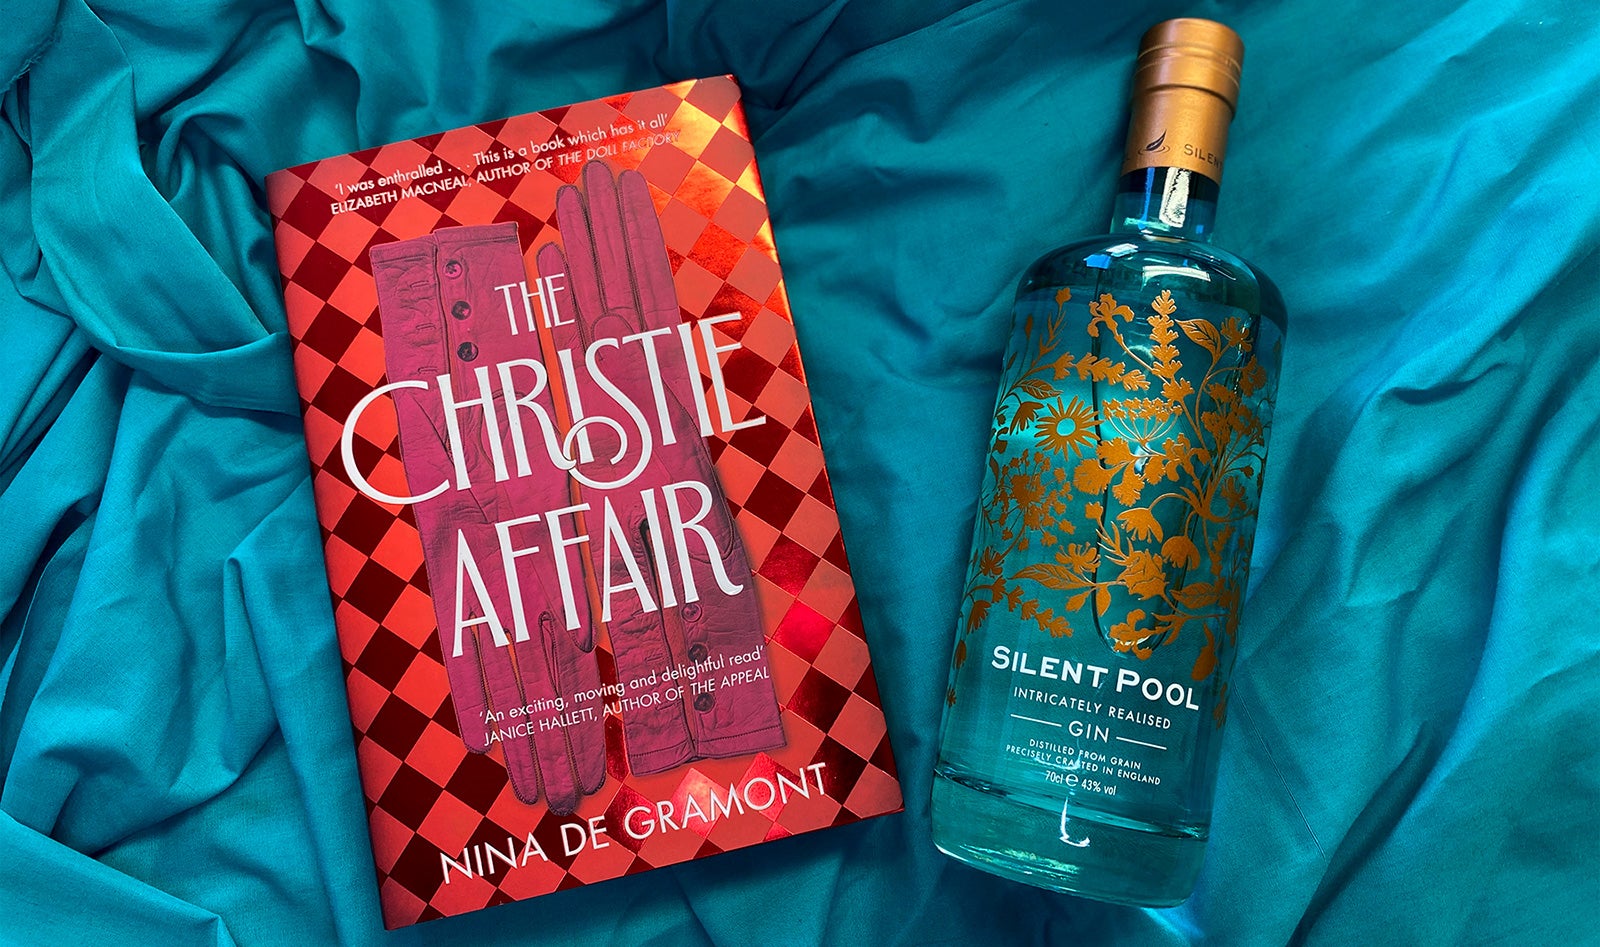 A copy of The Christie Affair and a bottle of Silent Pool gin rest on a blue cloth.